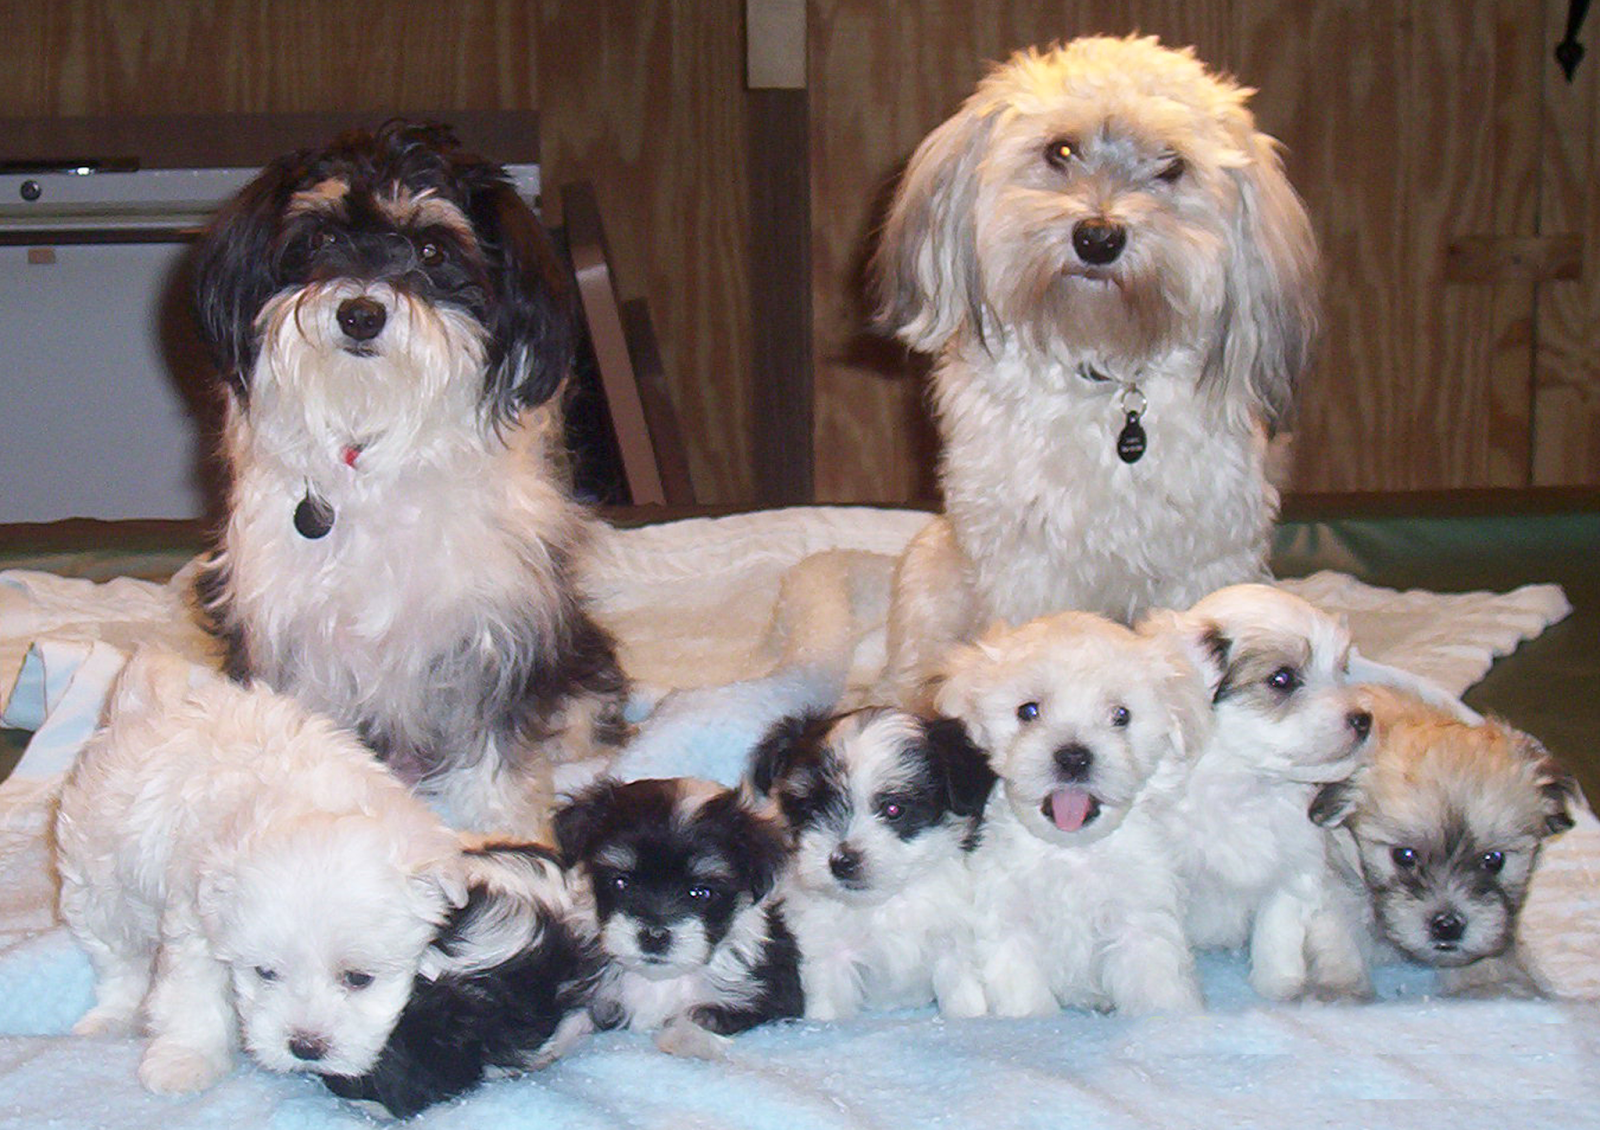 Rules of the Jungle: Havanese puppies